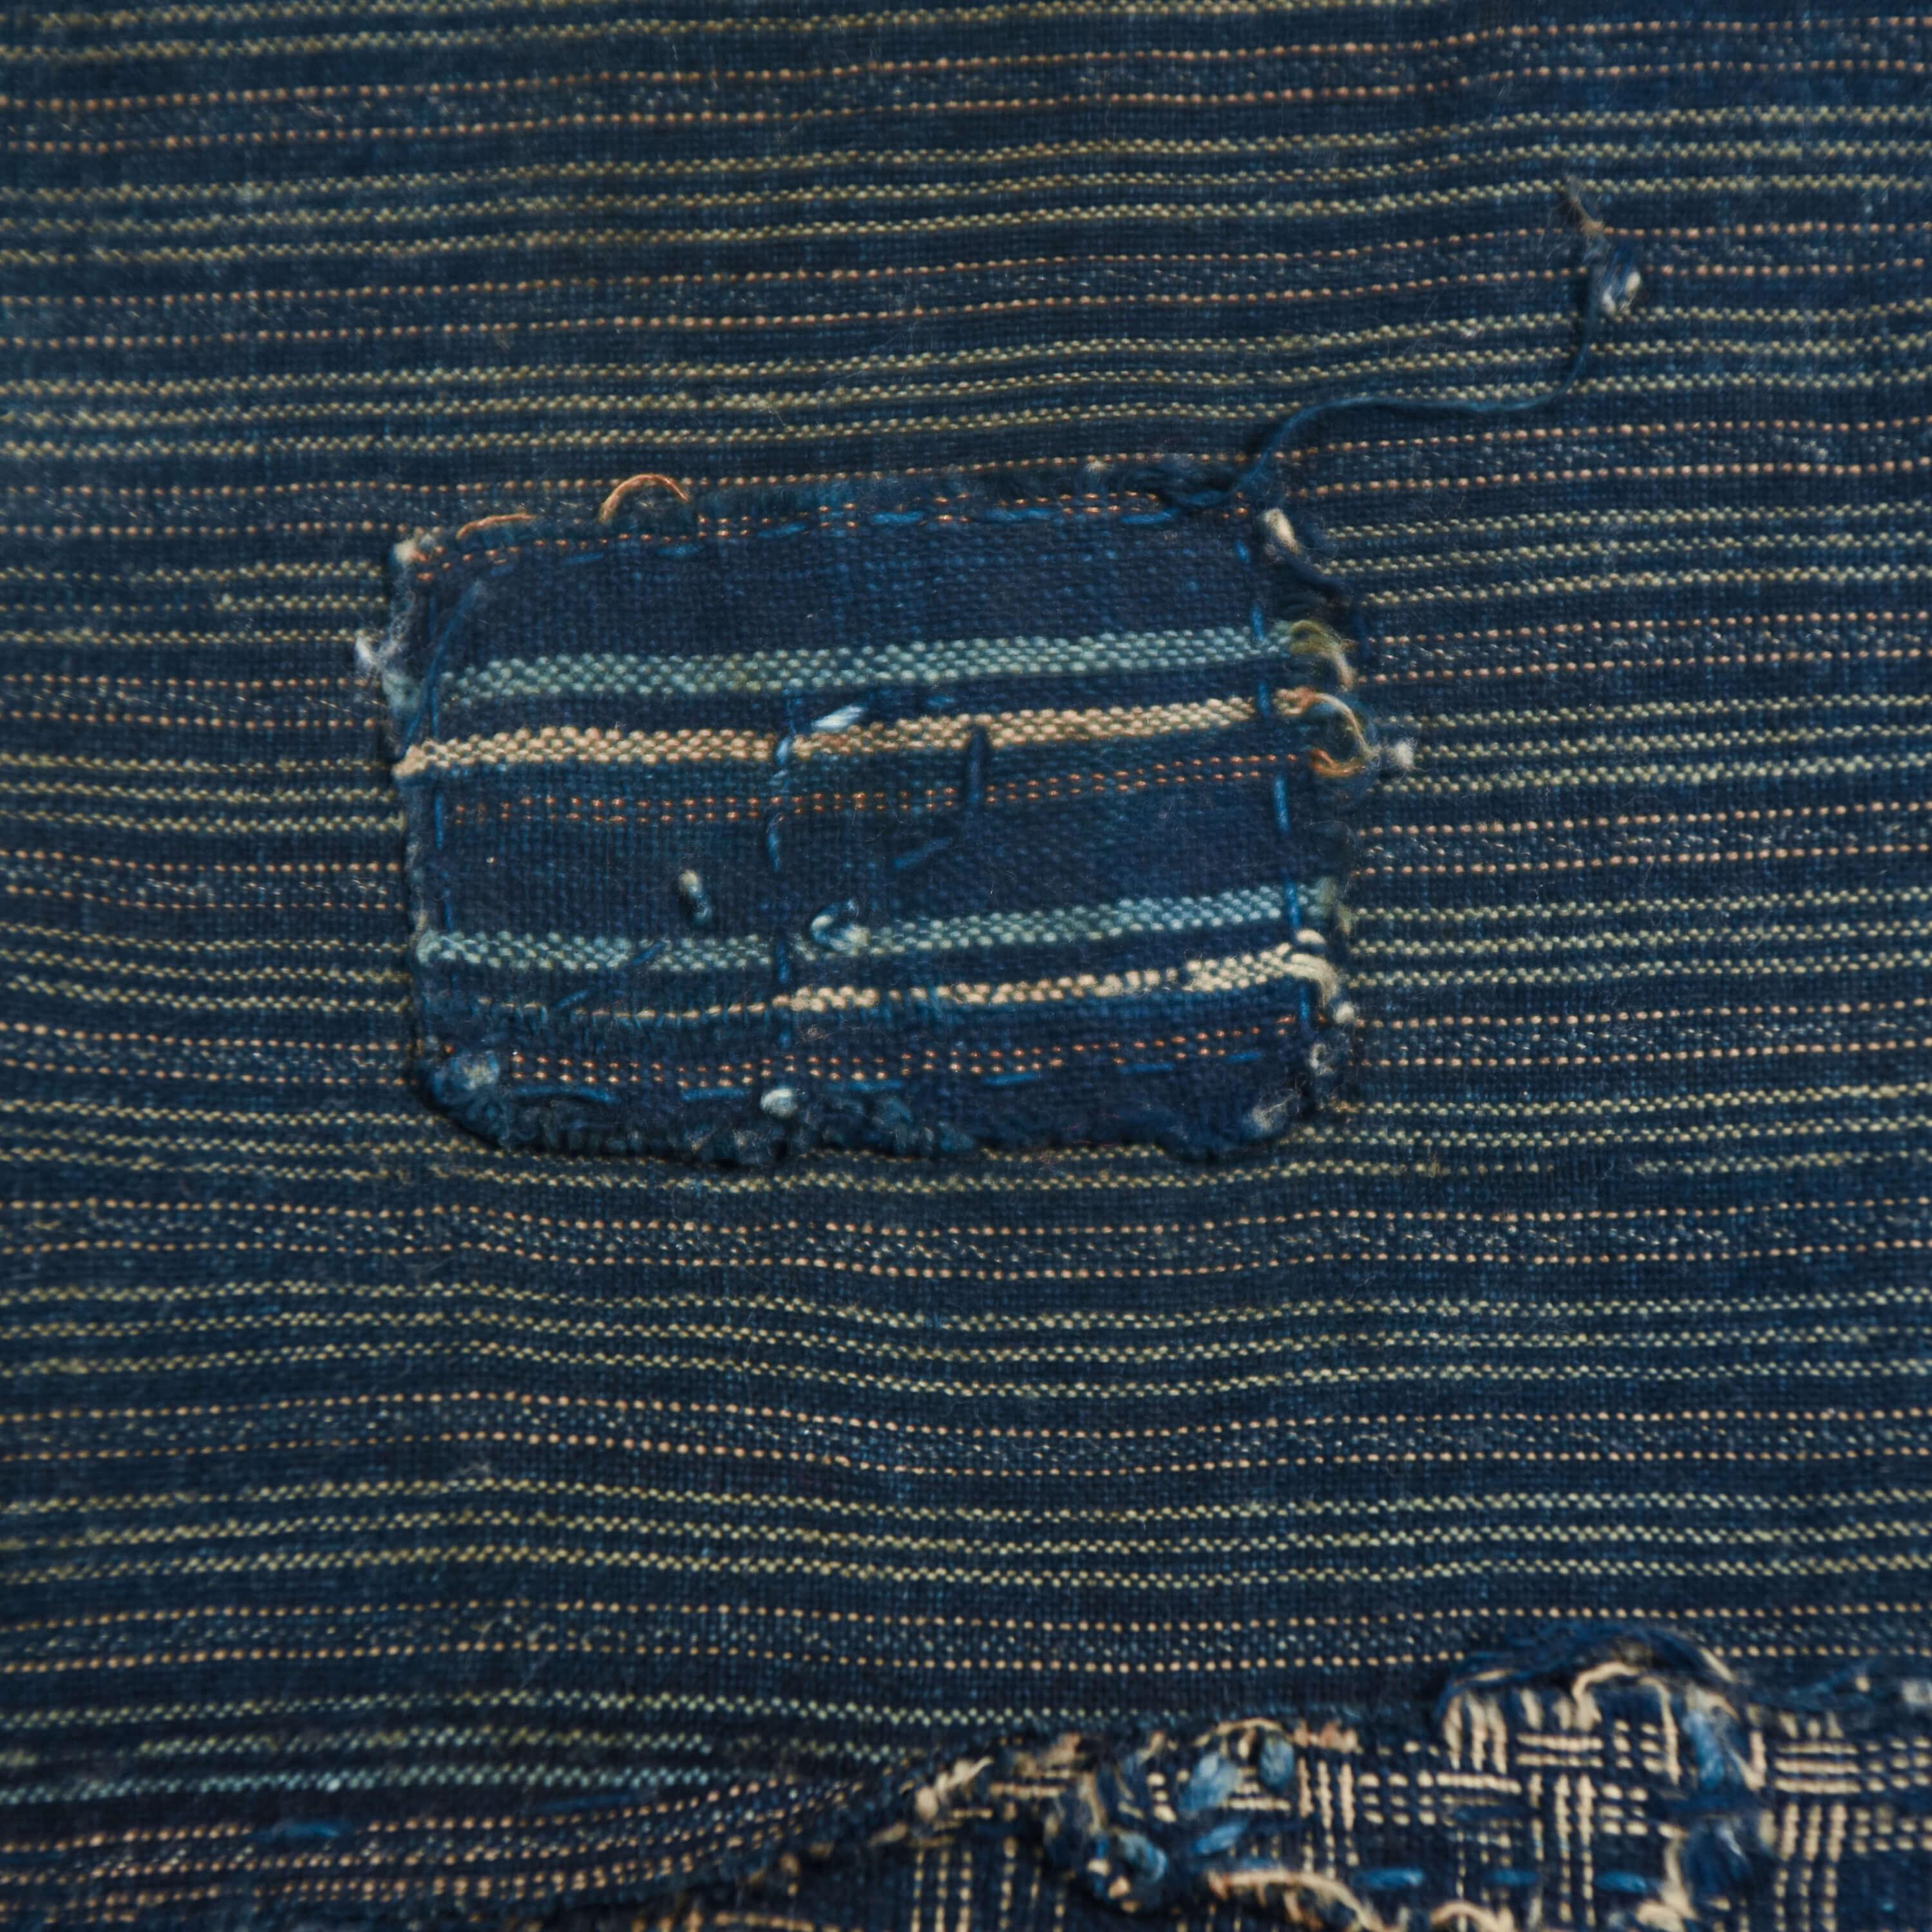 A Japanese Boro futon cover made from hand-dyed, hand-loomed indigo cotton. It has been repeated patched and mended. Boro textiles derive from the Japanese term boroboro, meaning tattered or worn and this is a beautiful example of the style. The